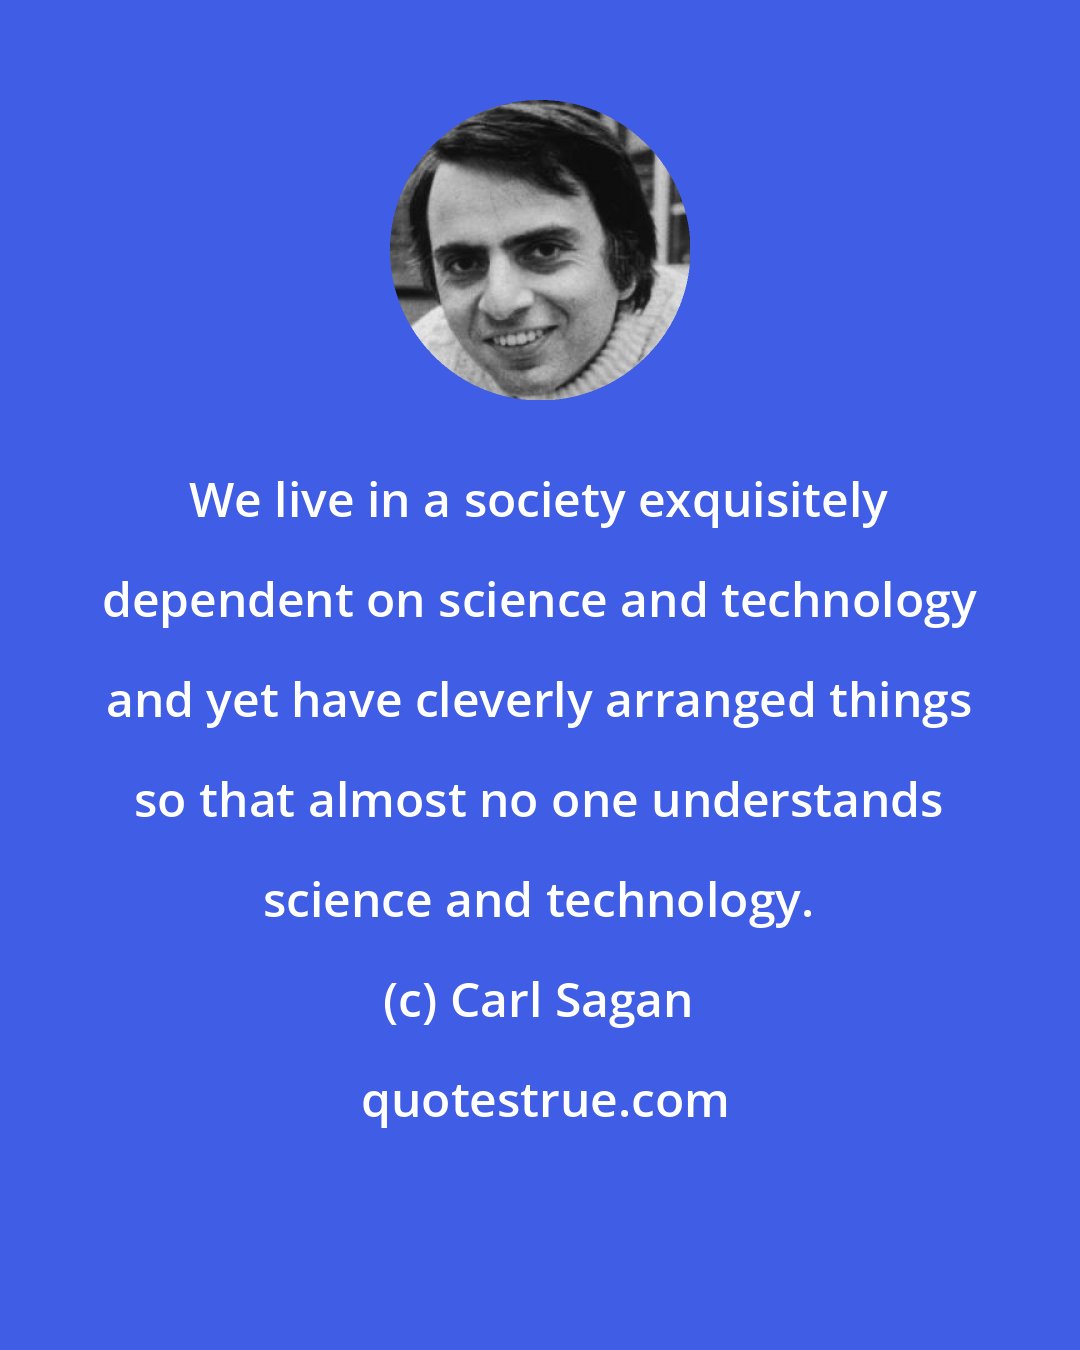 Carl Sagan: We live in a society exquisitely dependent on science and technology and yet have cleverly arranged things so that almost no one understands science and technology.